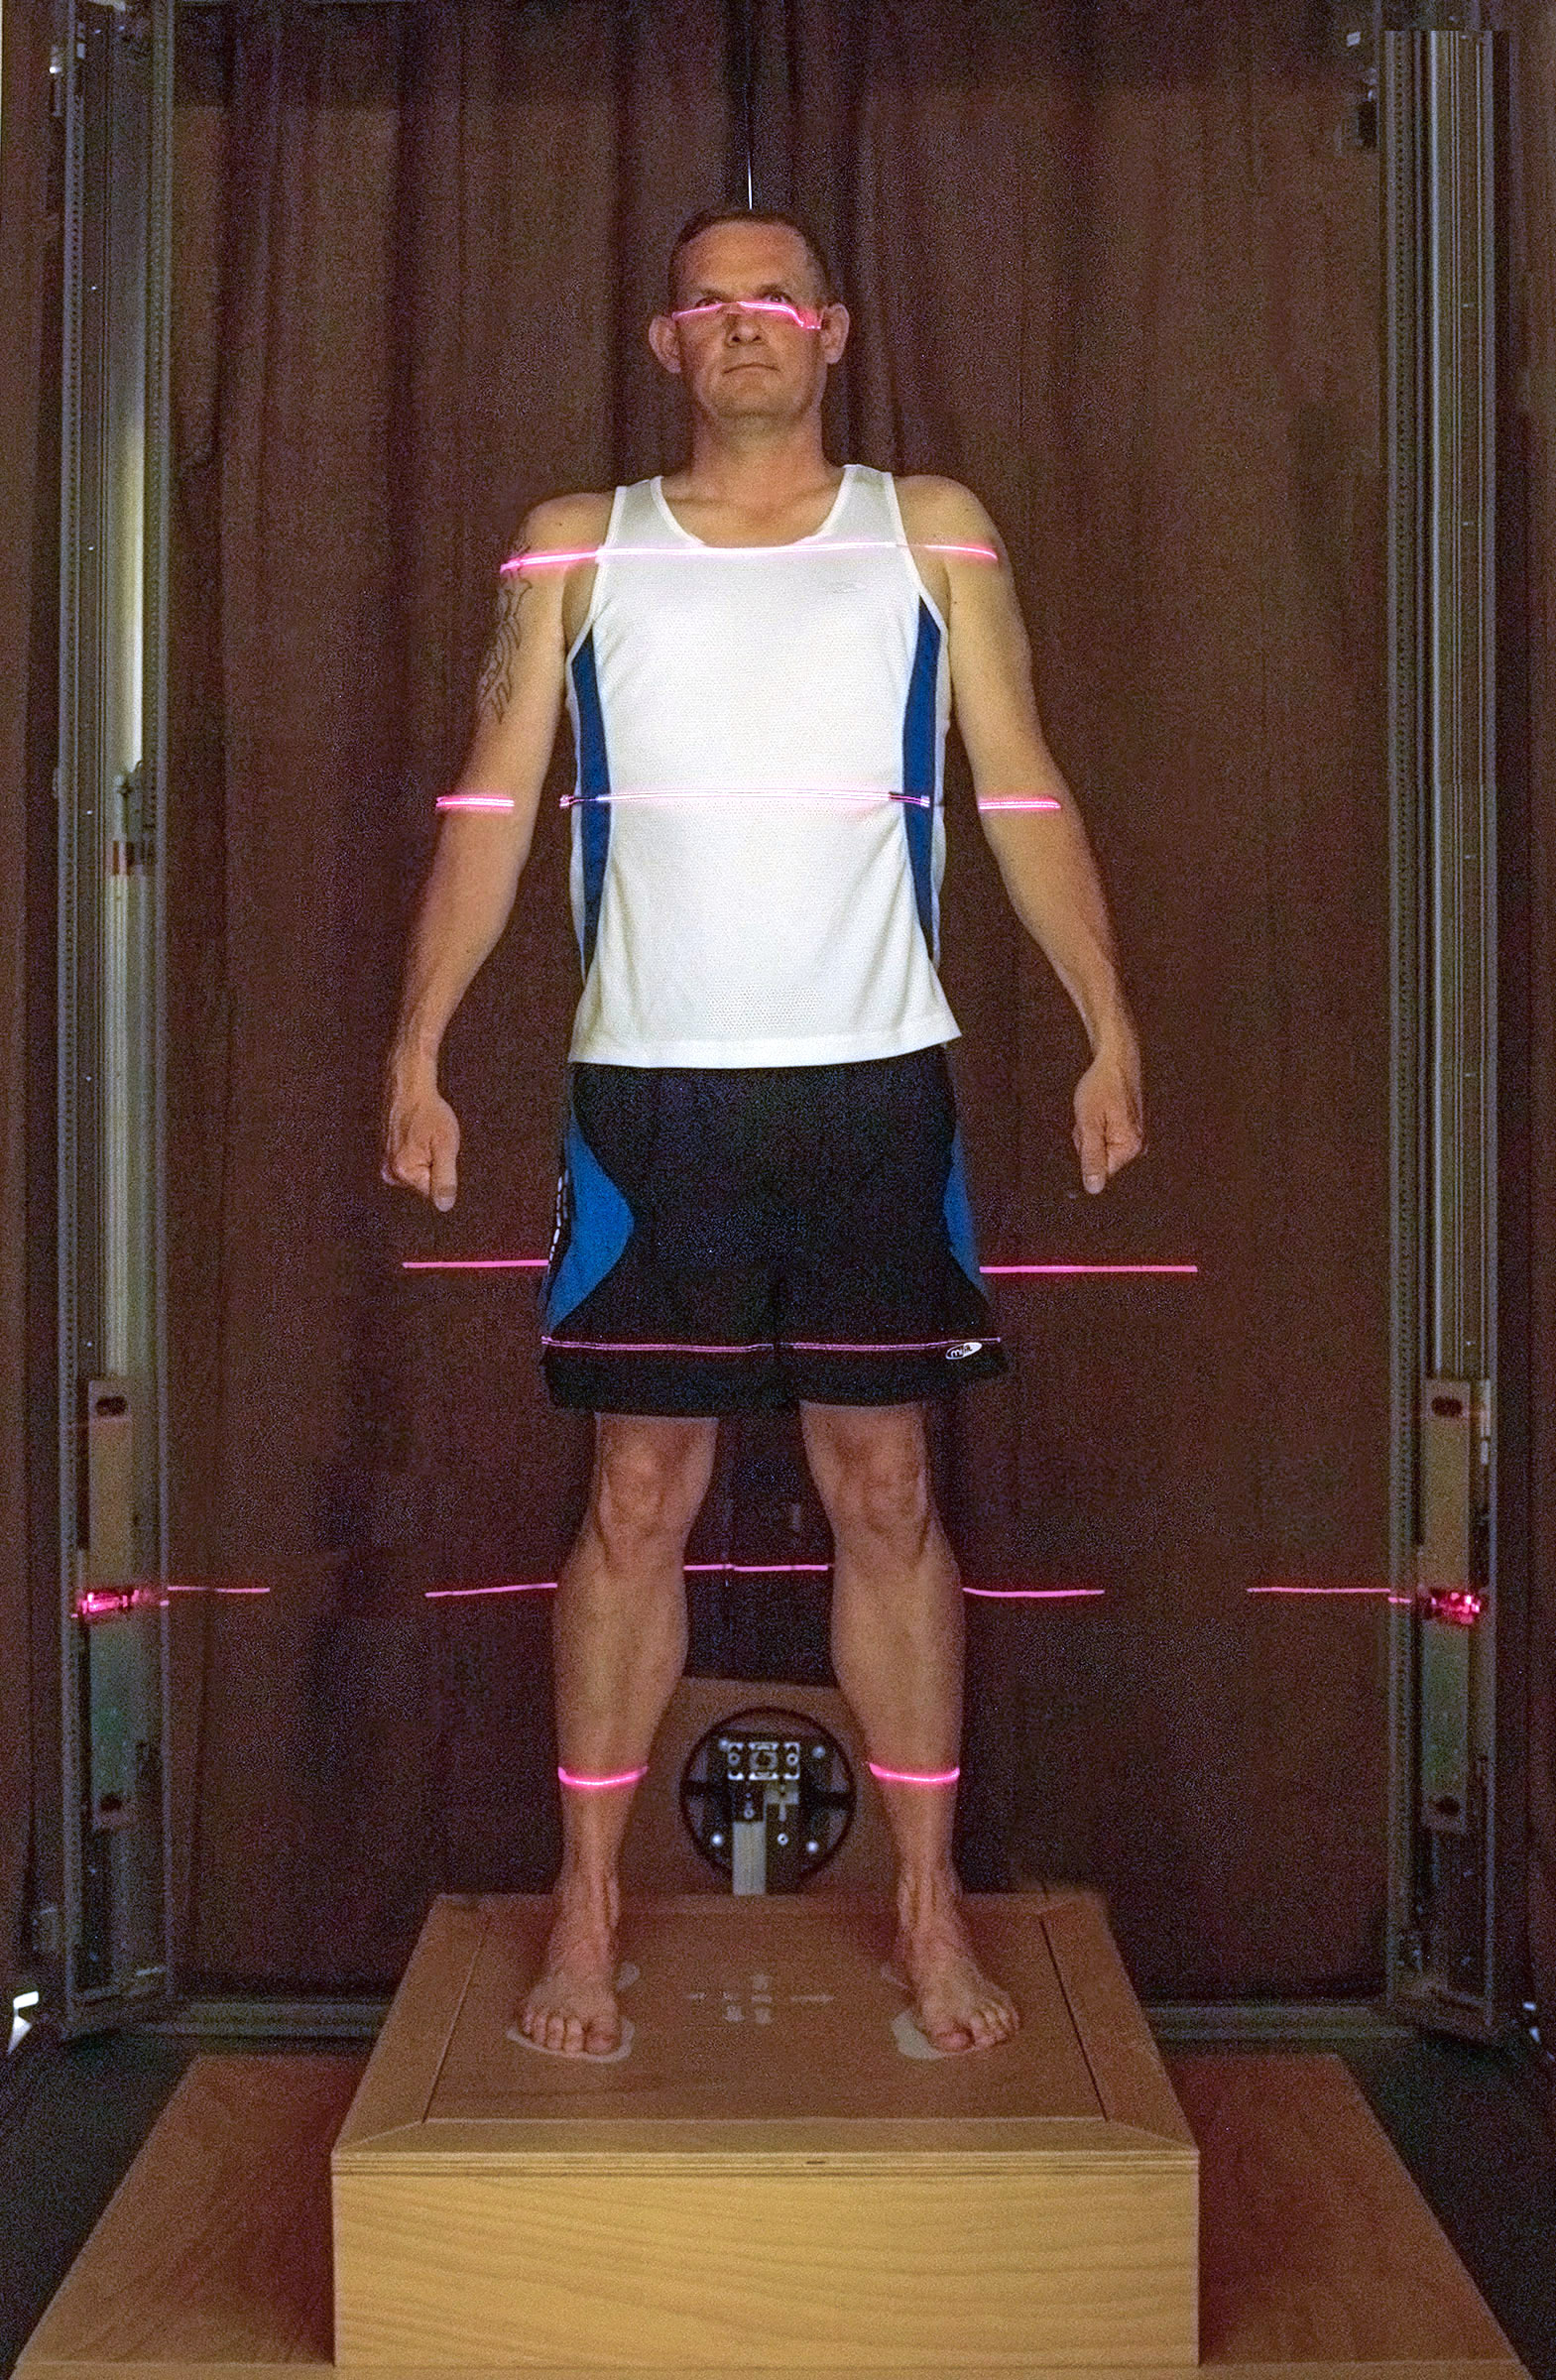 Image shows an aviator standing on a wooden block inside the body scanner, with scanning lines shining on his body.